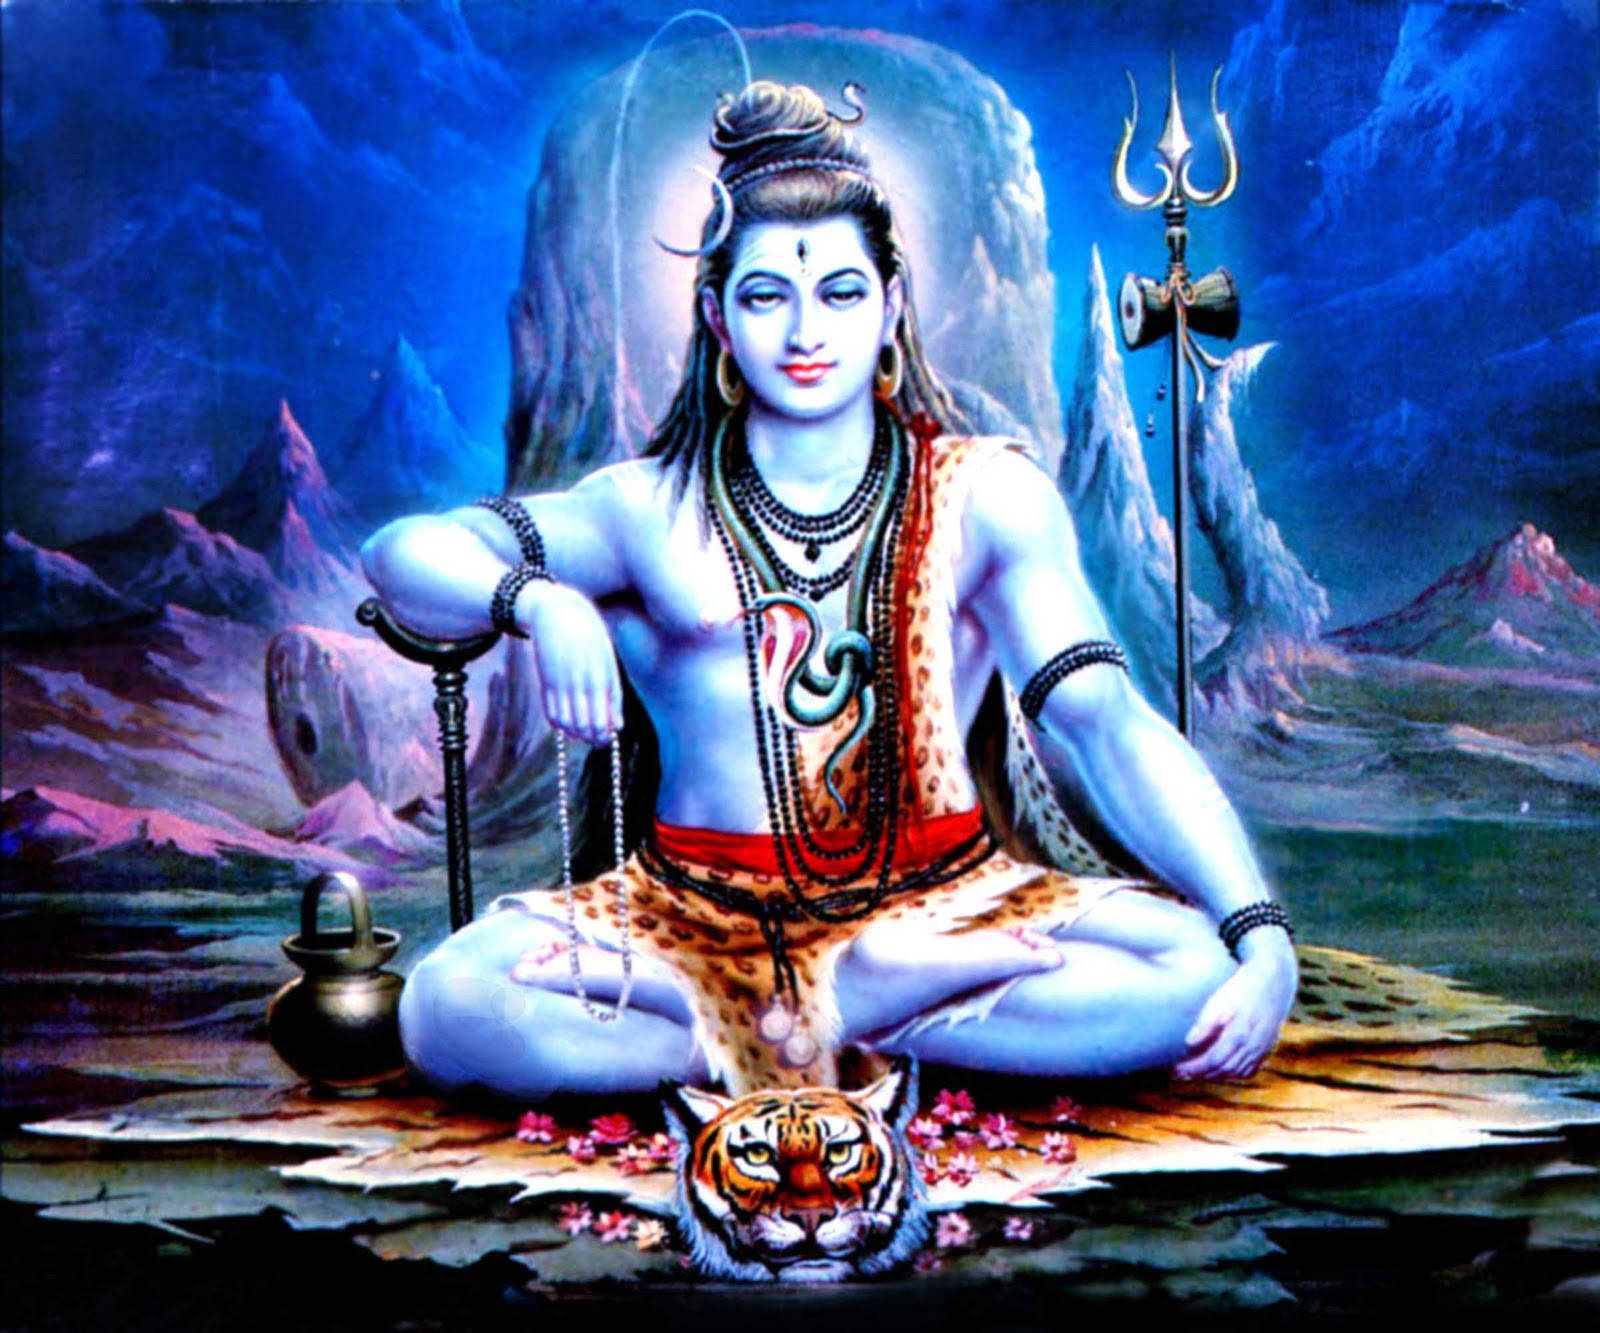 300+] Lord Shiva Wallpapers | Wallpapers.com